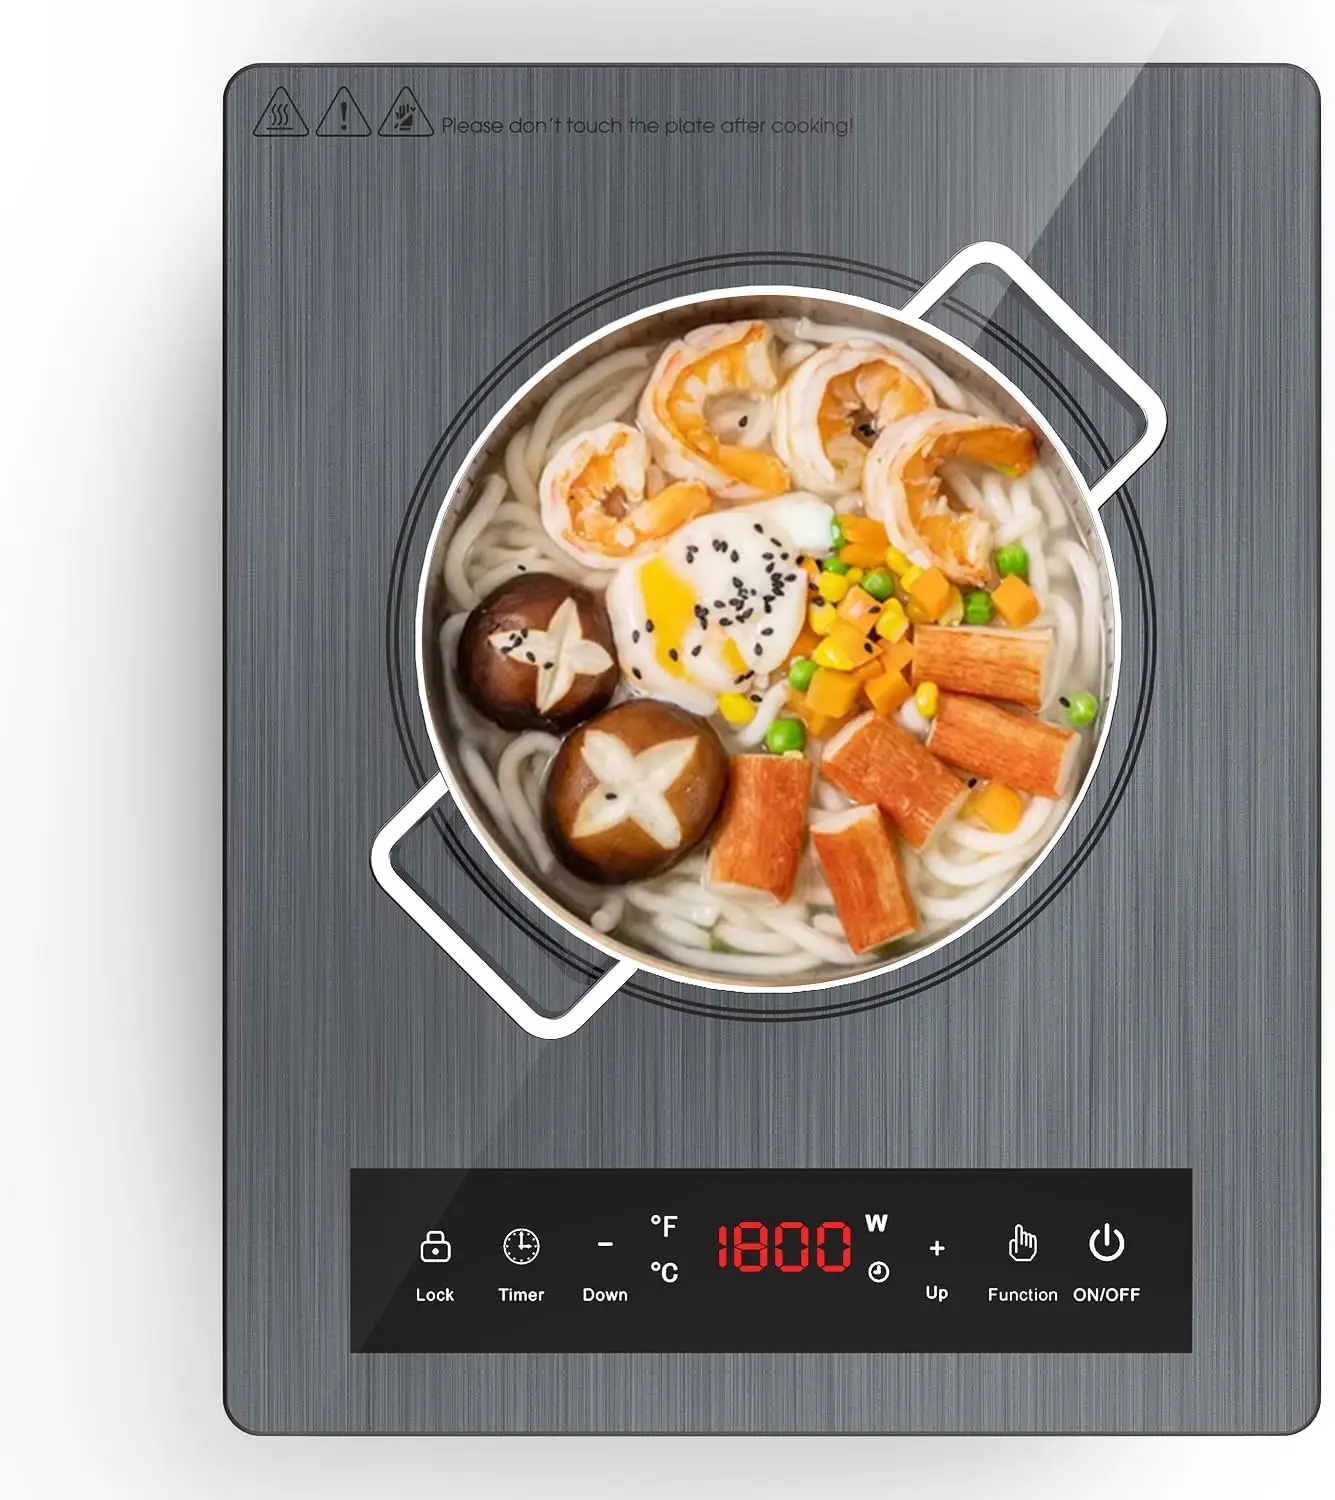 

Induction Cooktop 110v,1800W Countertop Single Burner Induction Hot Plate, Stove for Cooking,3-Hour Setting,Grey Crystal Glass